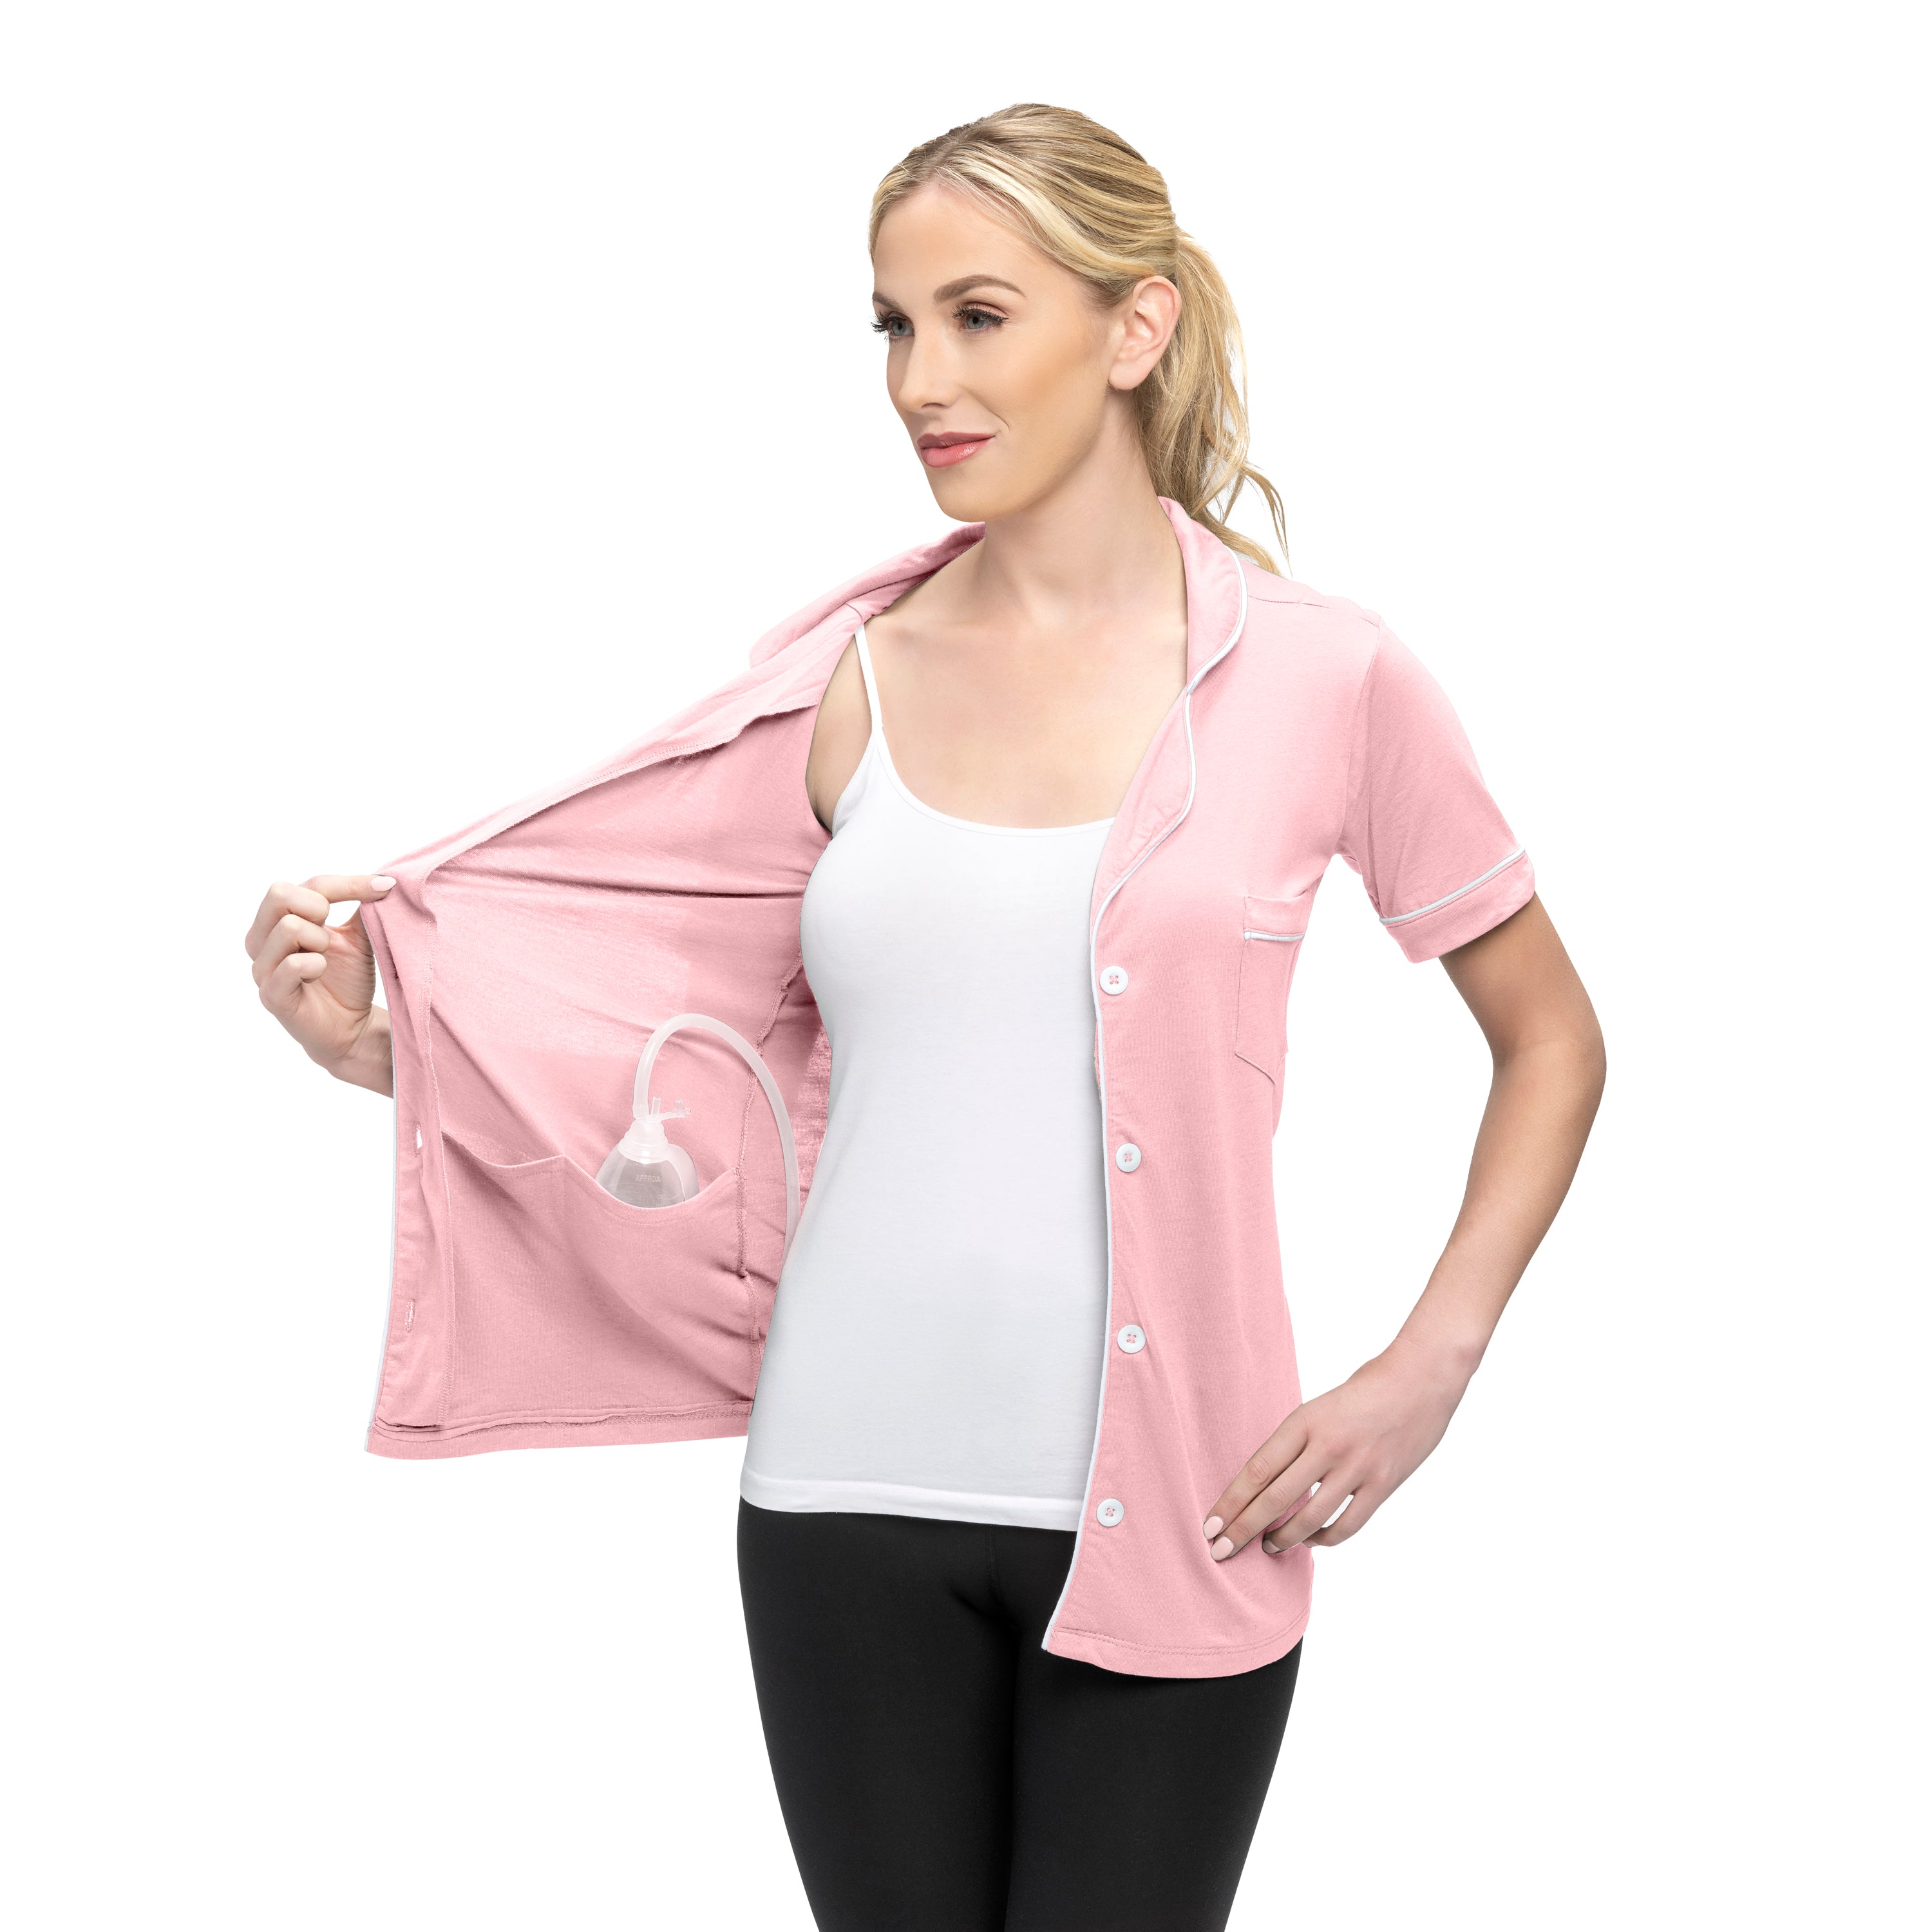 Post Mastectomy Surgery Recovery Shirt Lapel Collar Camisole With Drain Pockets